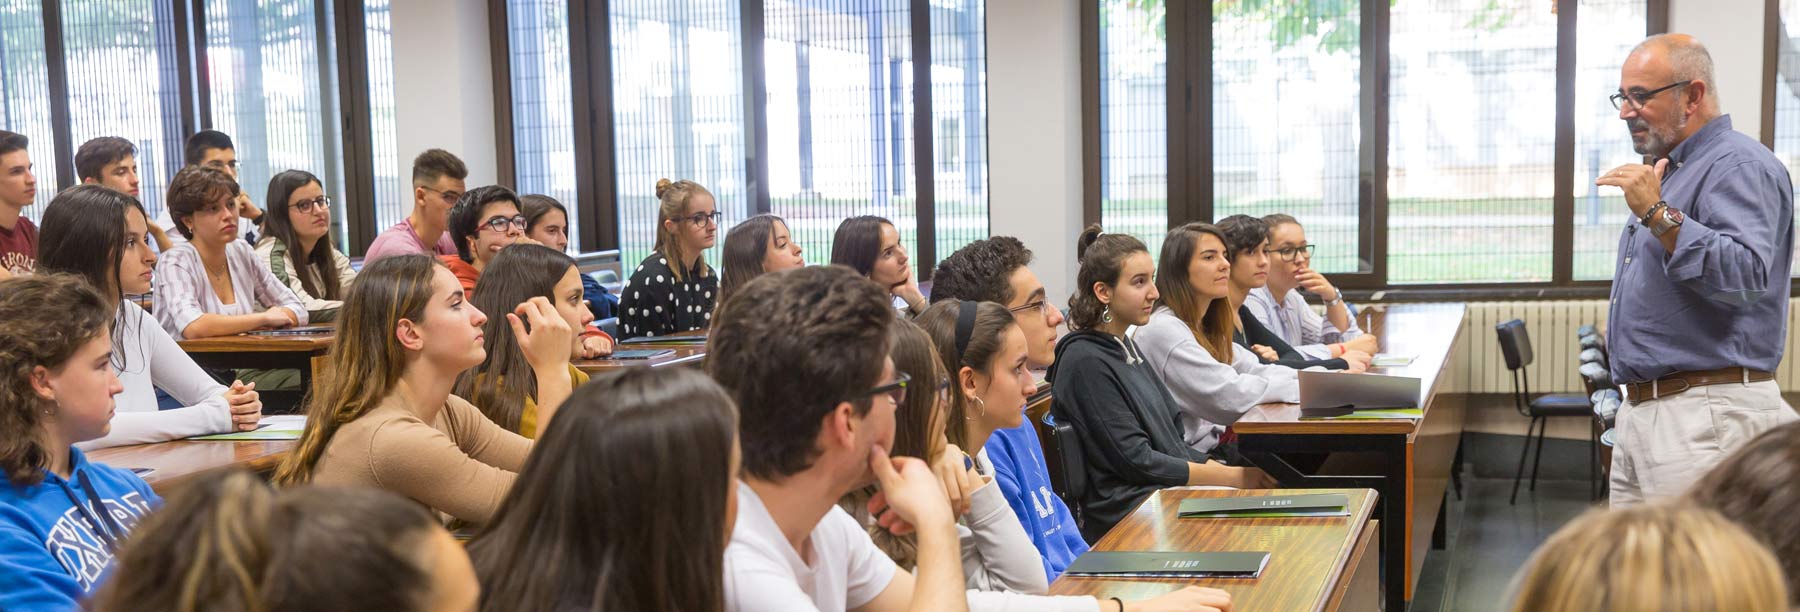 Ignacio López Goñi, giving a lecture class at the School of Sciences of the University of Navarra.